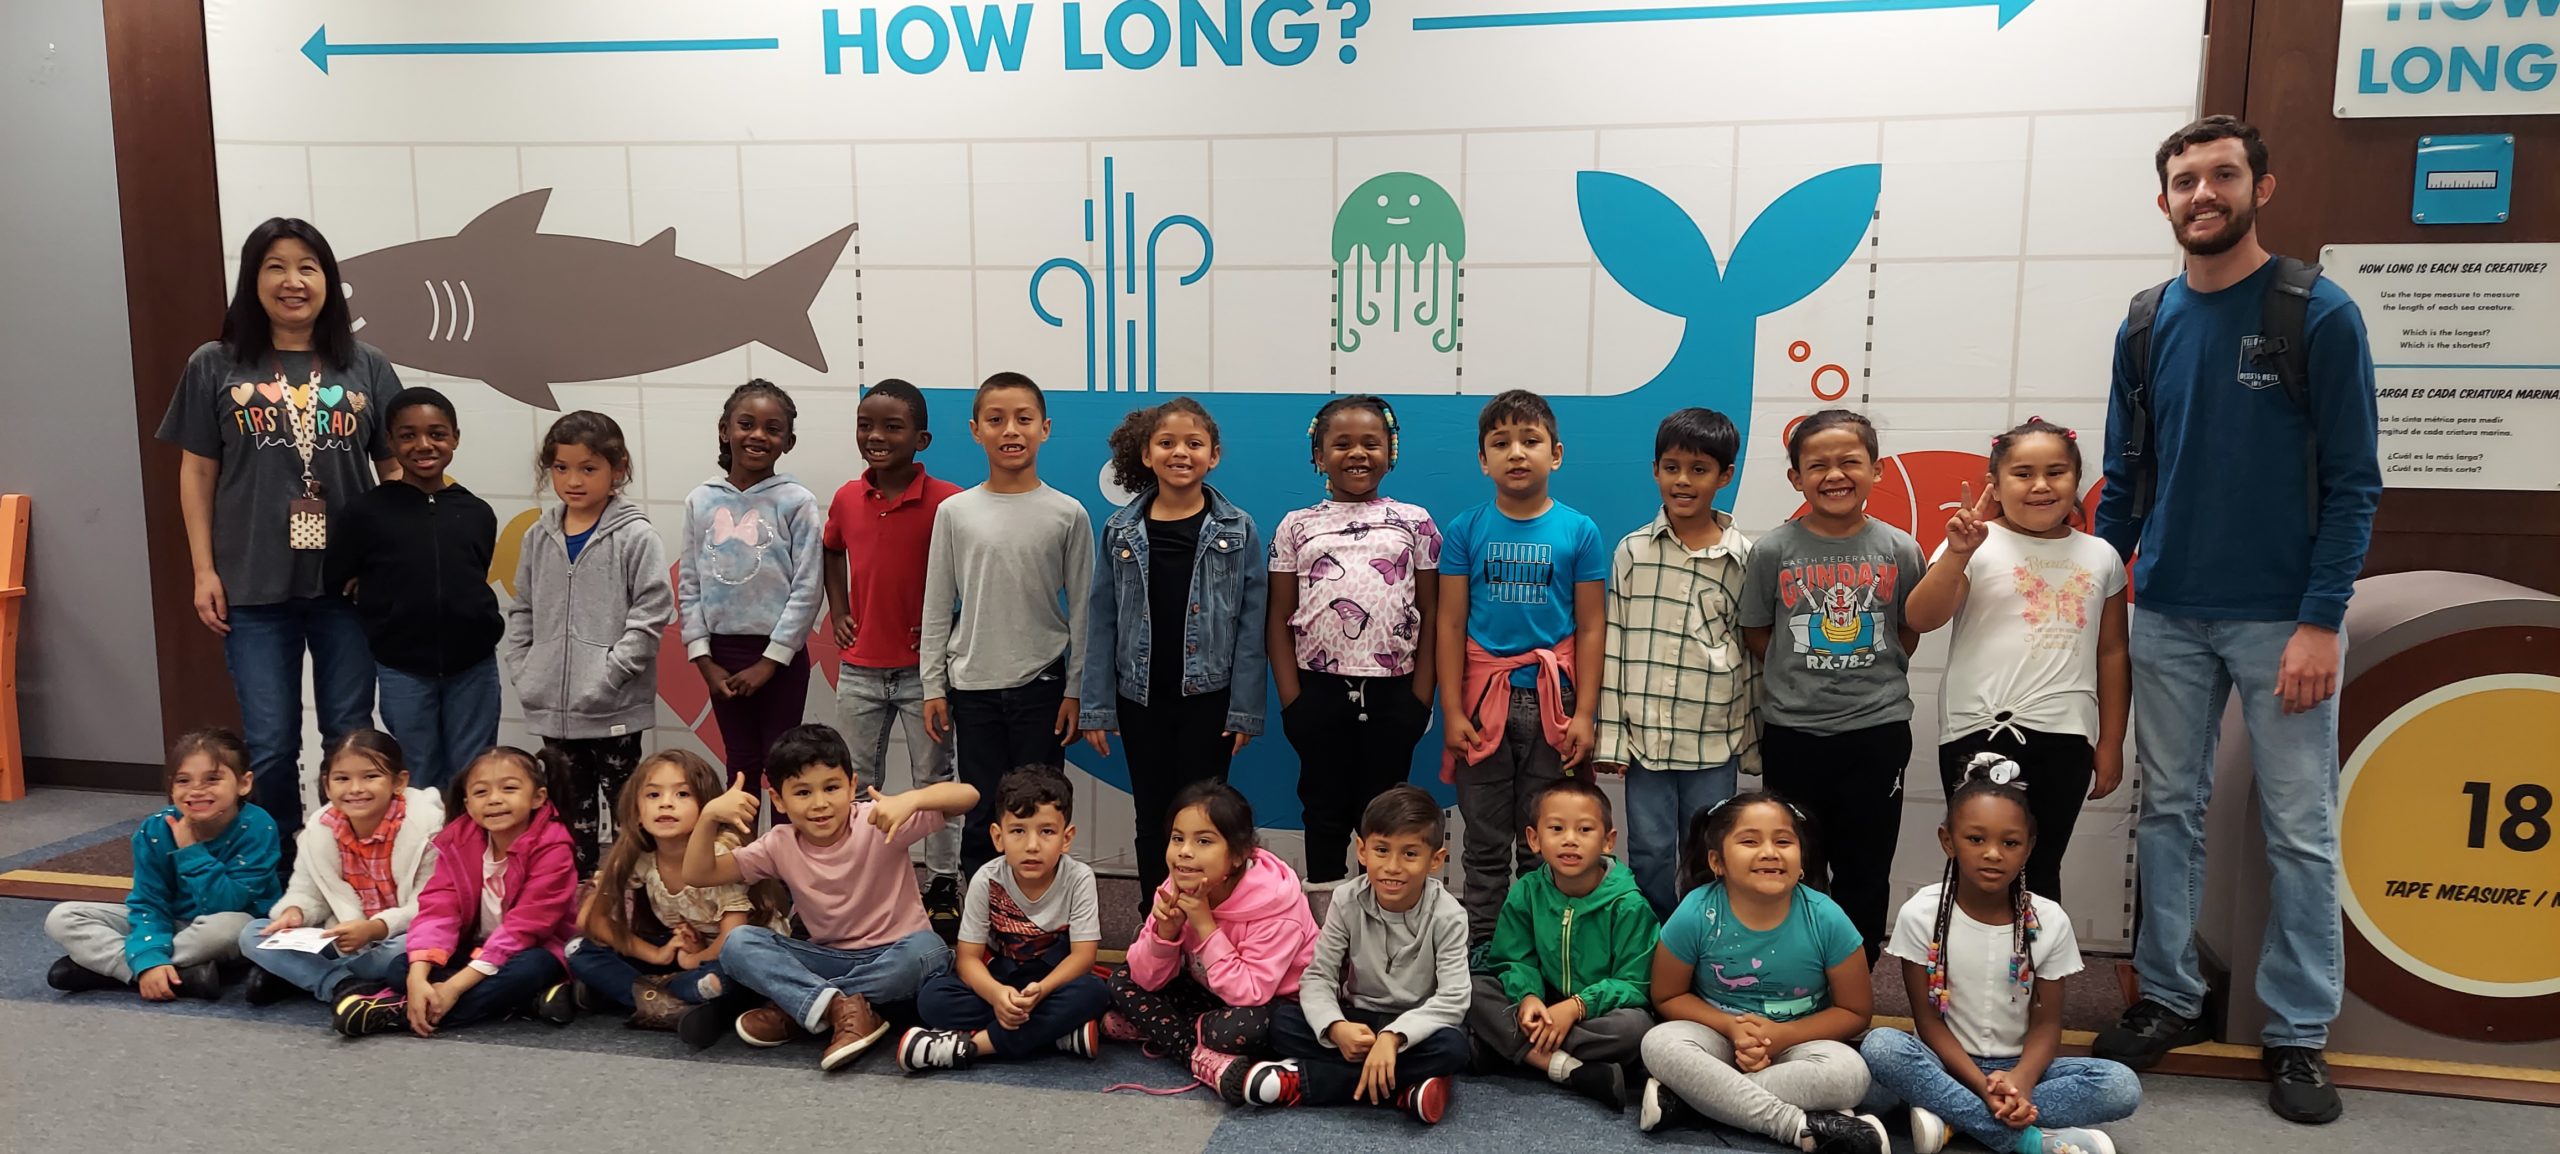 Two lines of students and their 2 teachers smile in a field trip photograph in front of a Measurement Rules exhibit piece.